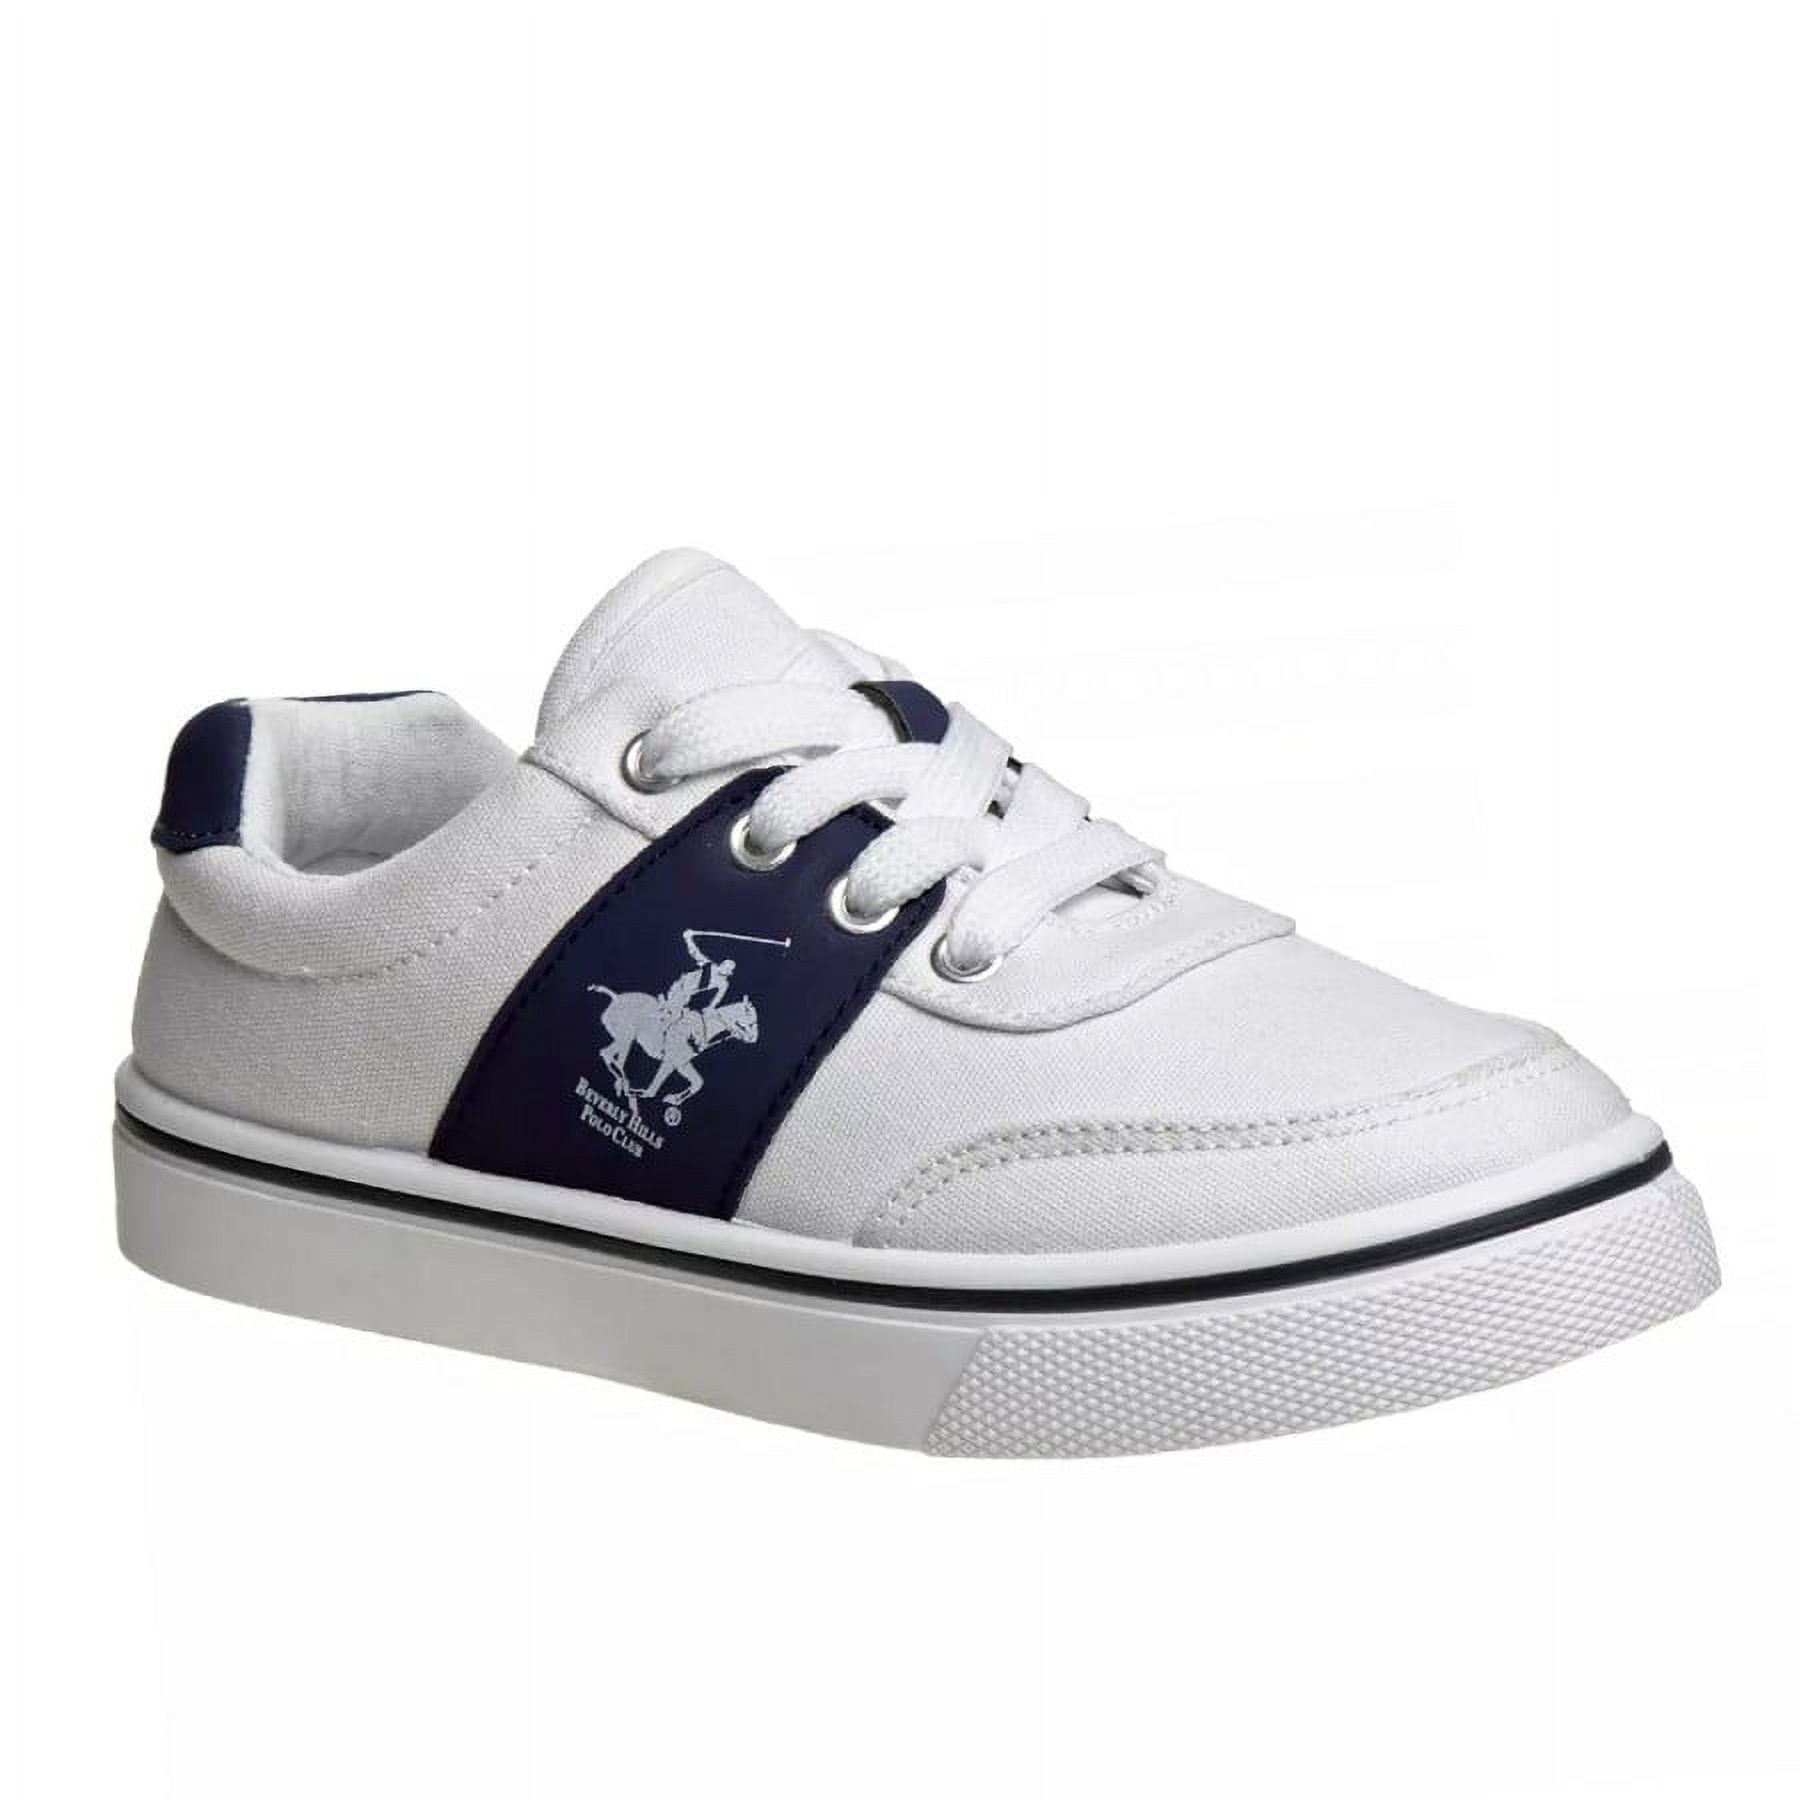 Polo Ralph Lauren Sayer Canvas / Sued Low Top Sneaker Light Navy / Multi PP  | The Sporting Lodge